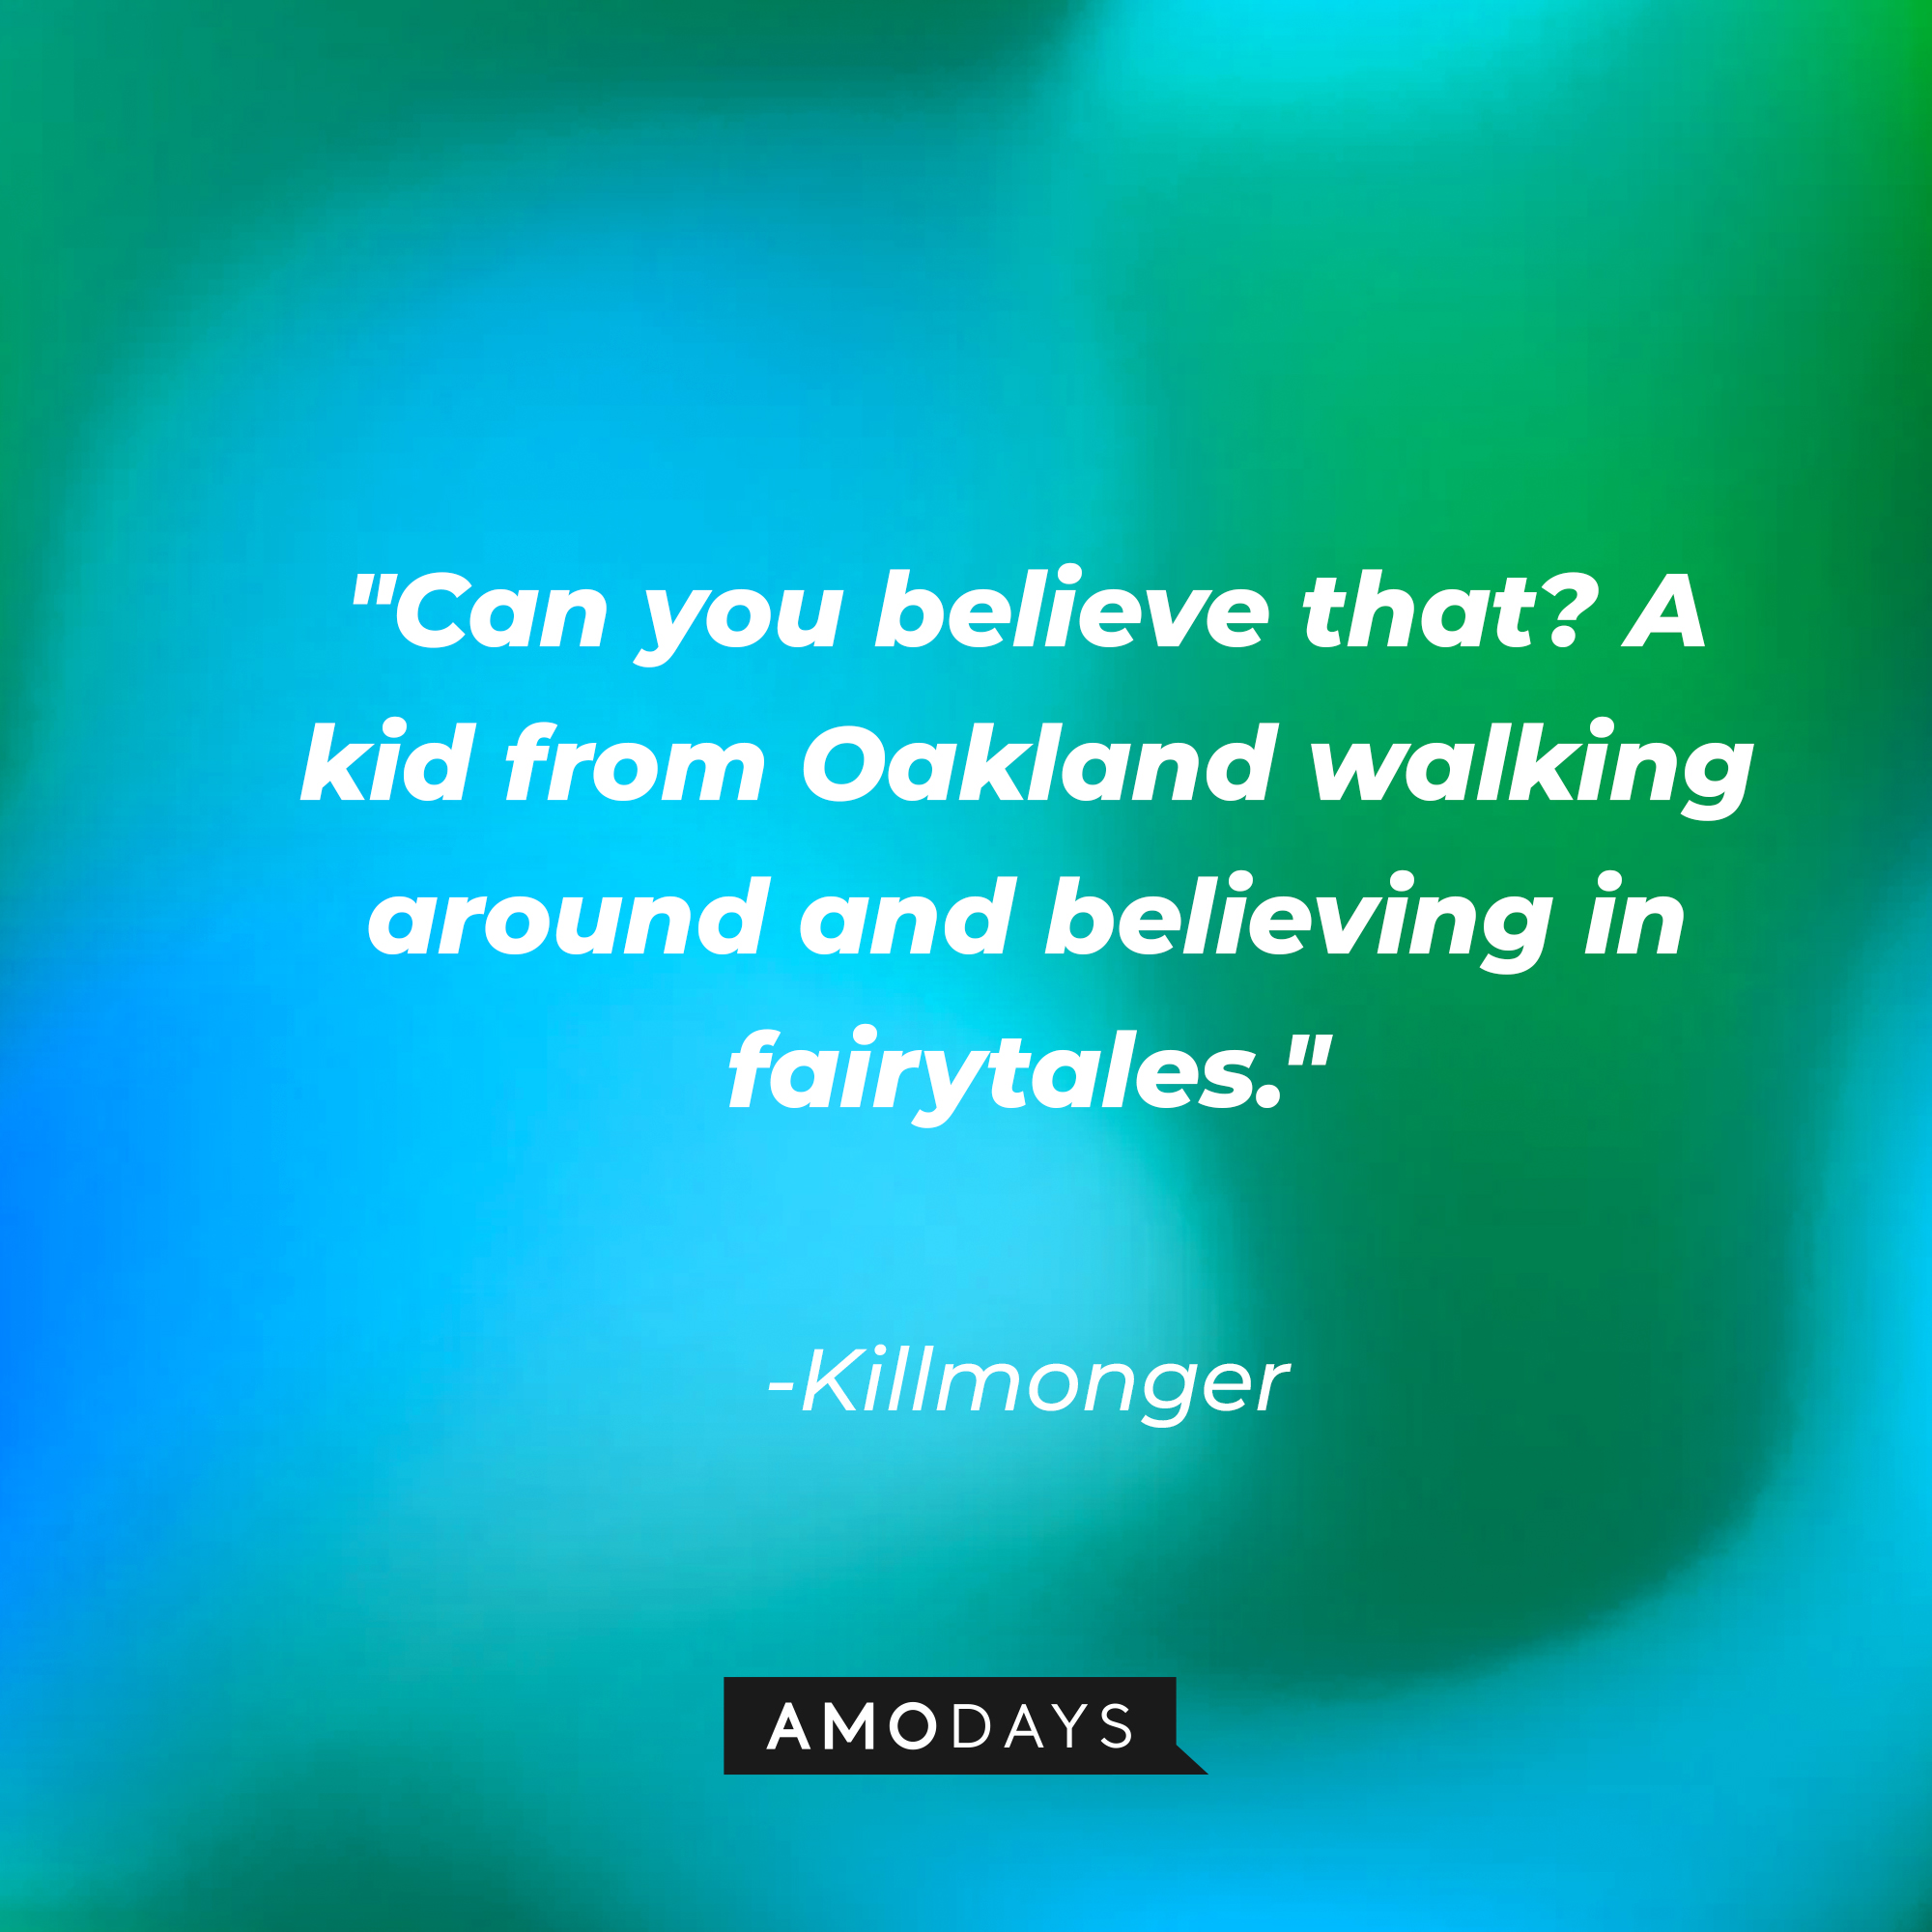 Killmonger's quote: "Can you believe that? A kid from Oakland walking around and believing in fairytales." | Source: AmoDays